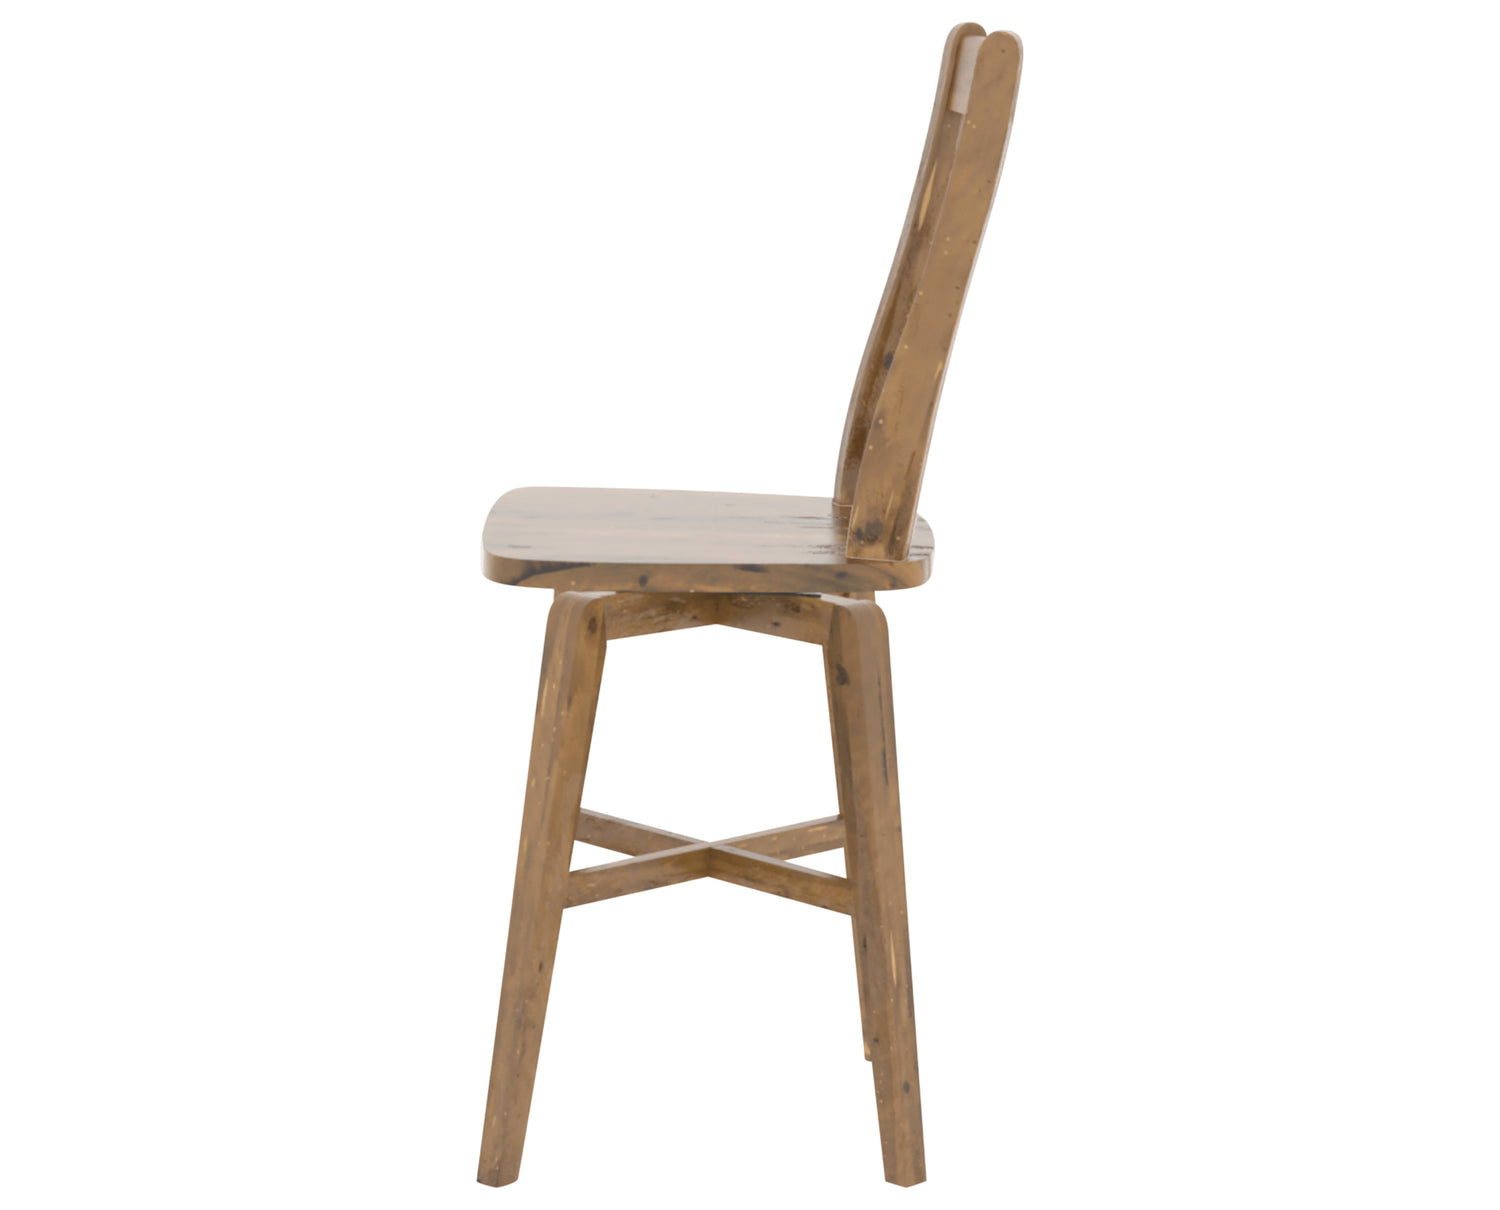 Oak Washed | Canadel Champlain Counter Stool 7250 | Valley Ridge Furniture